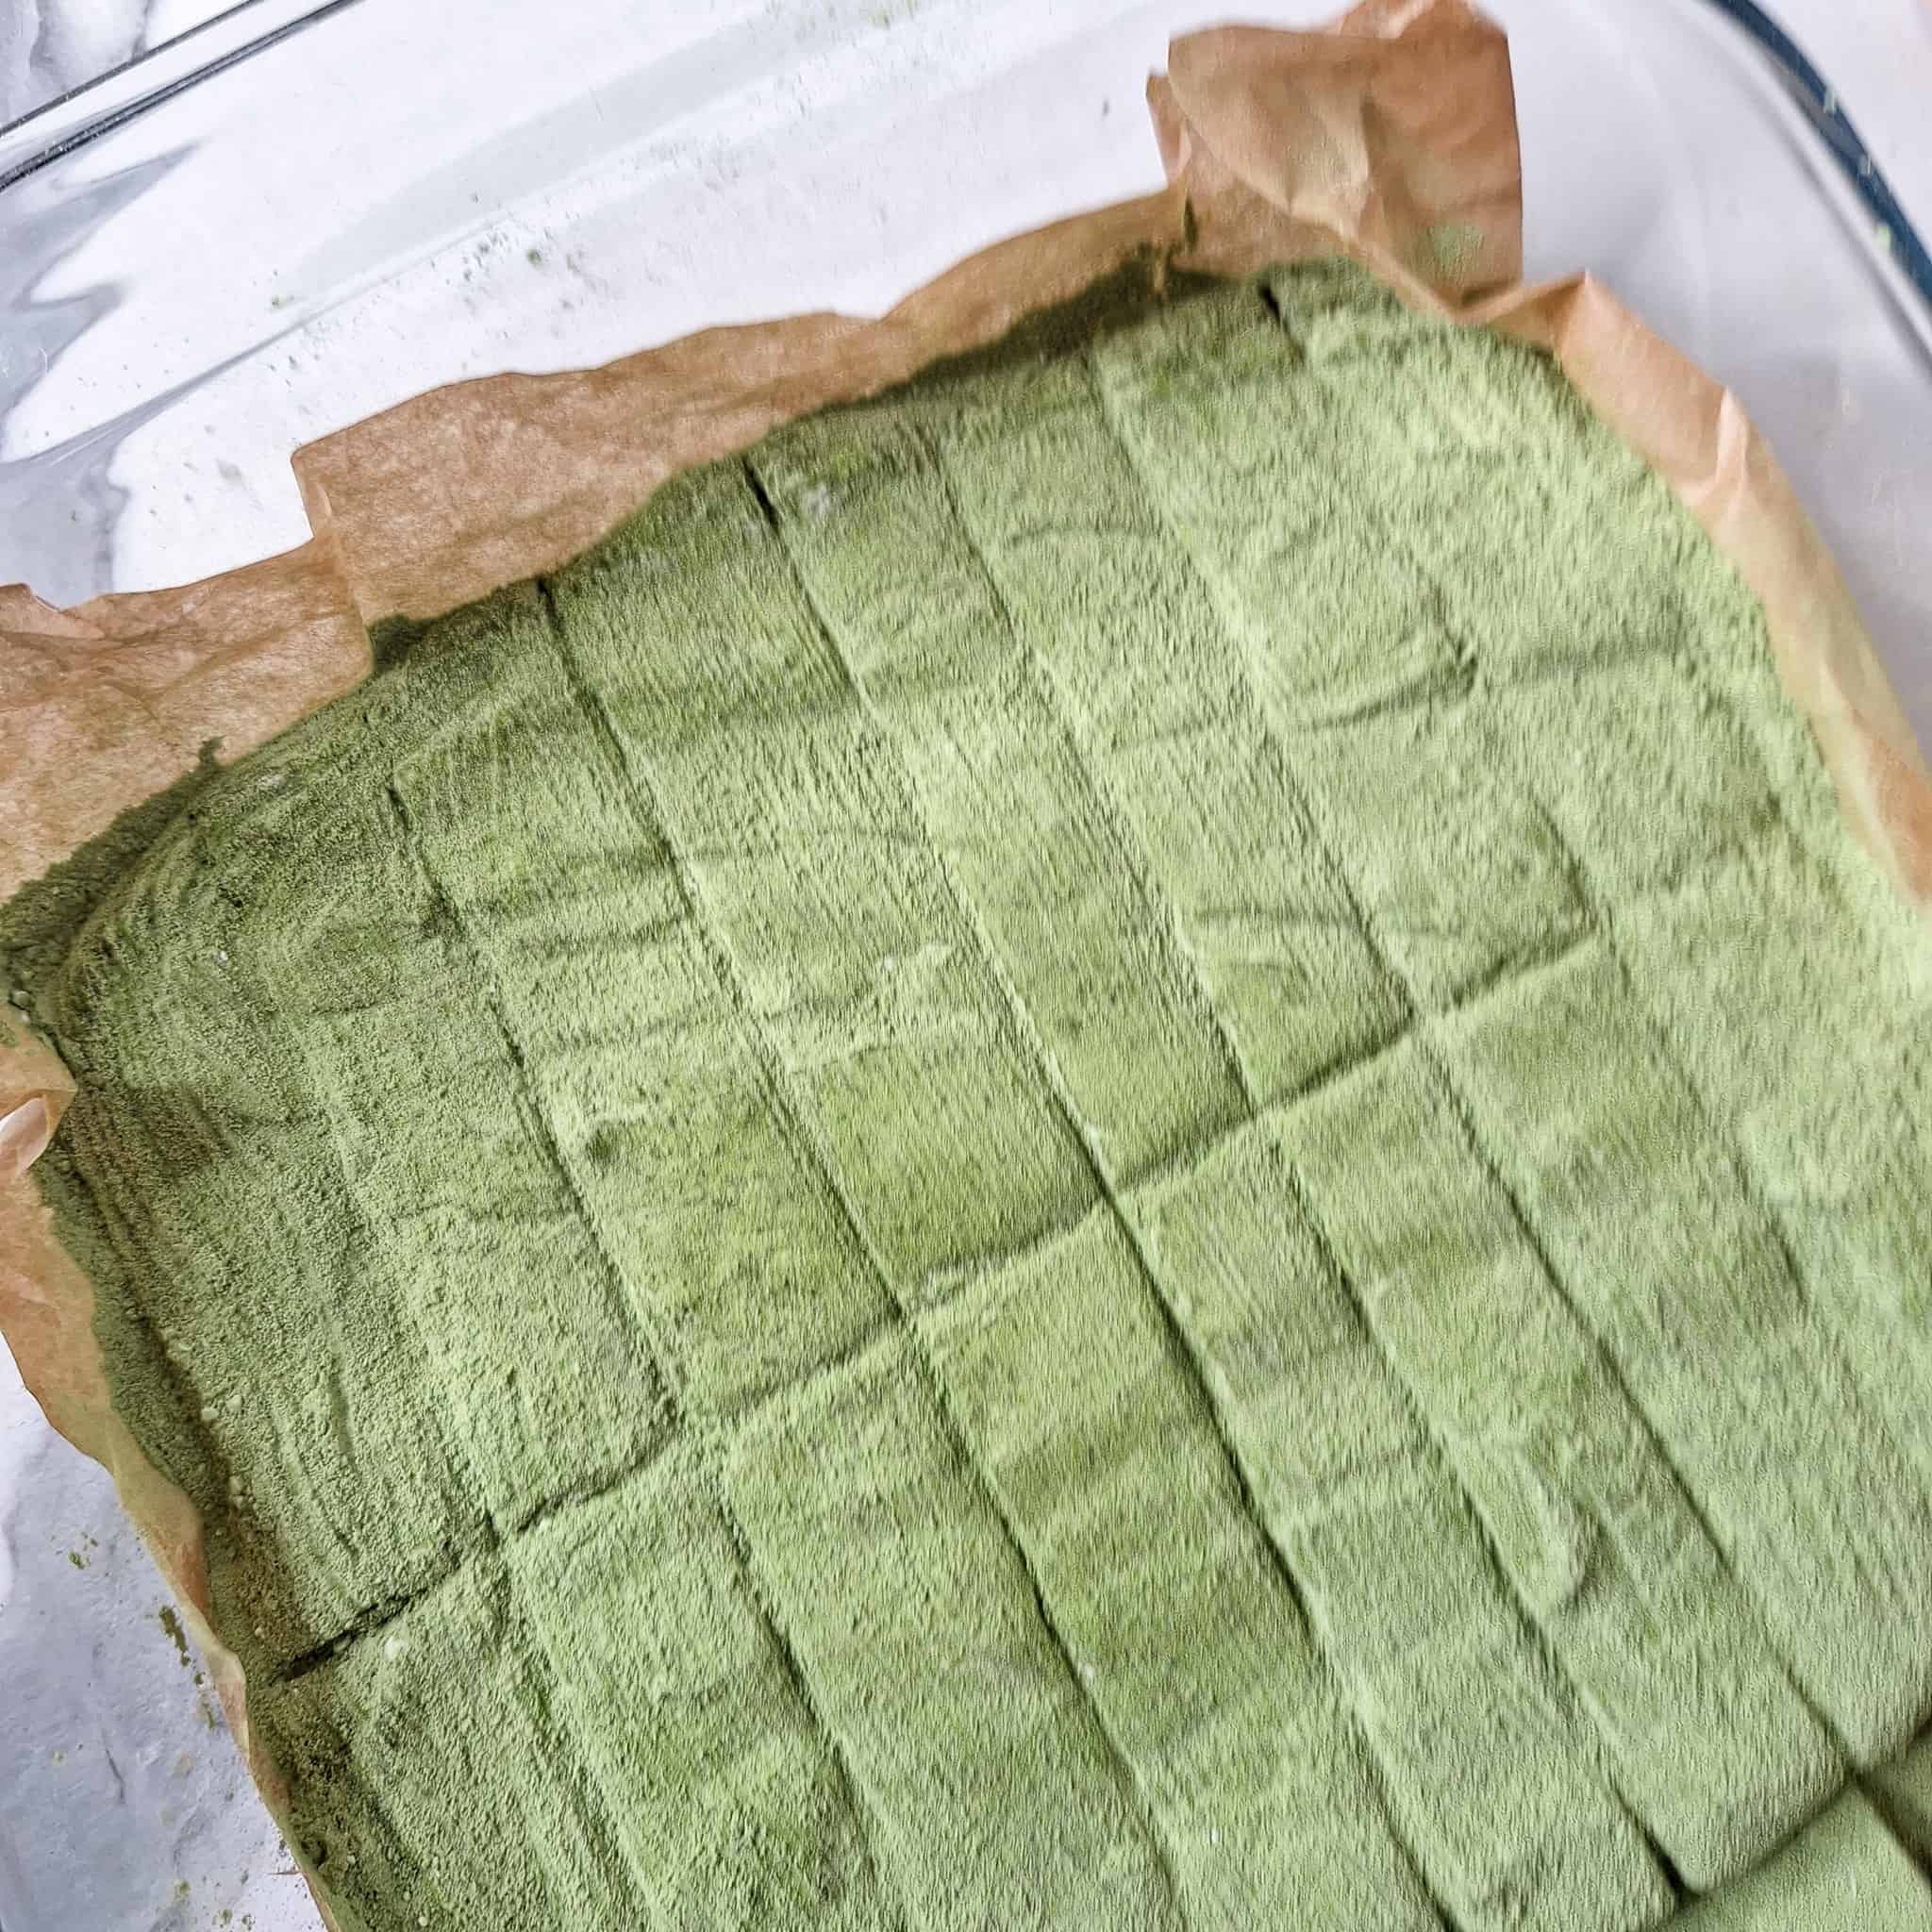 Sliced and dusted matcha espasol